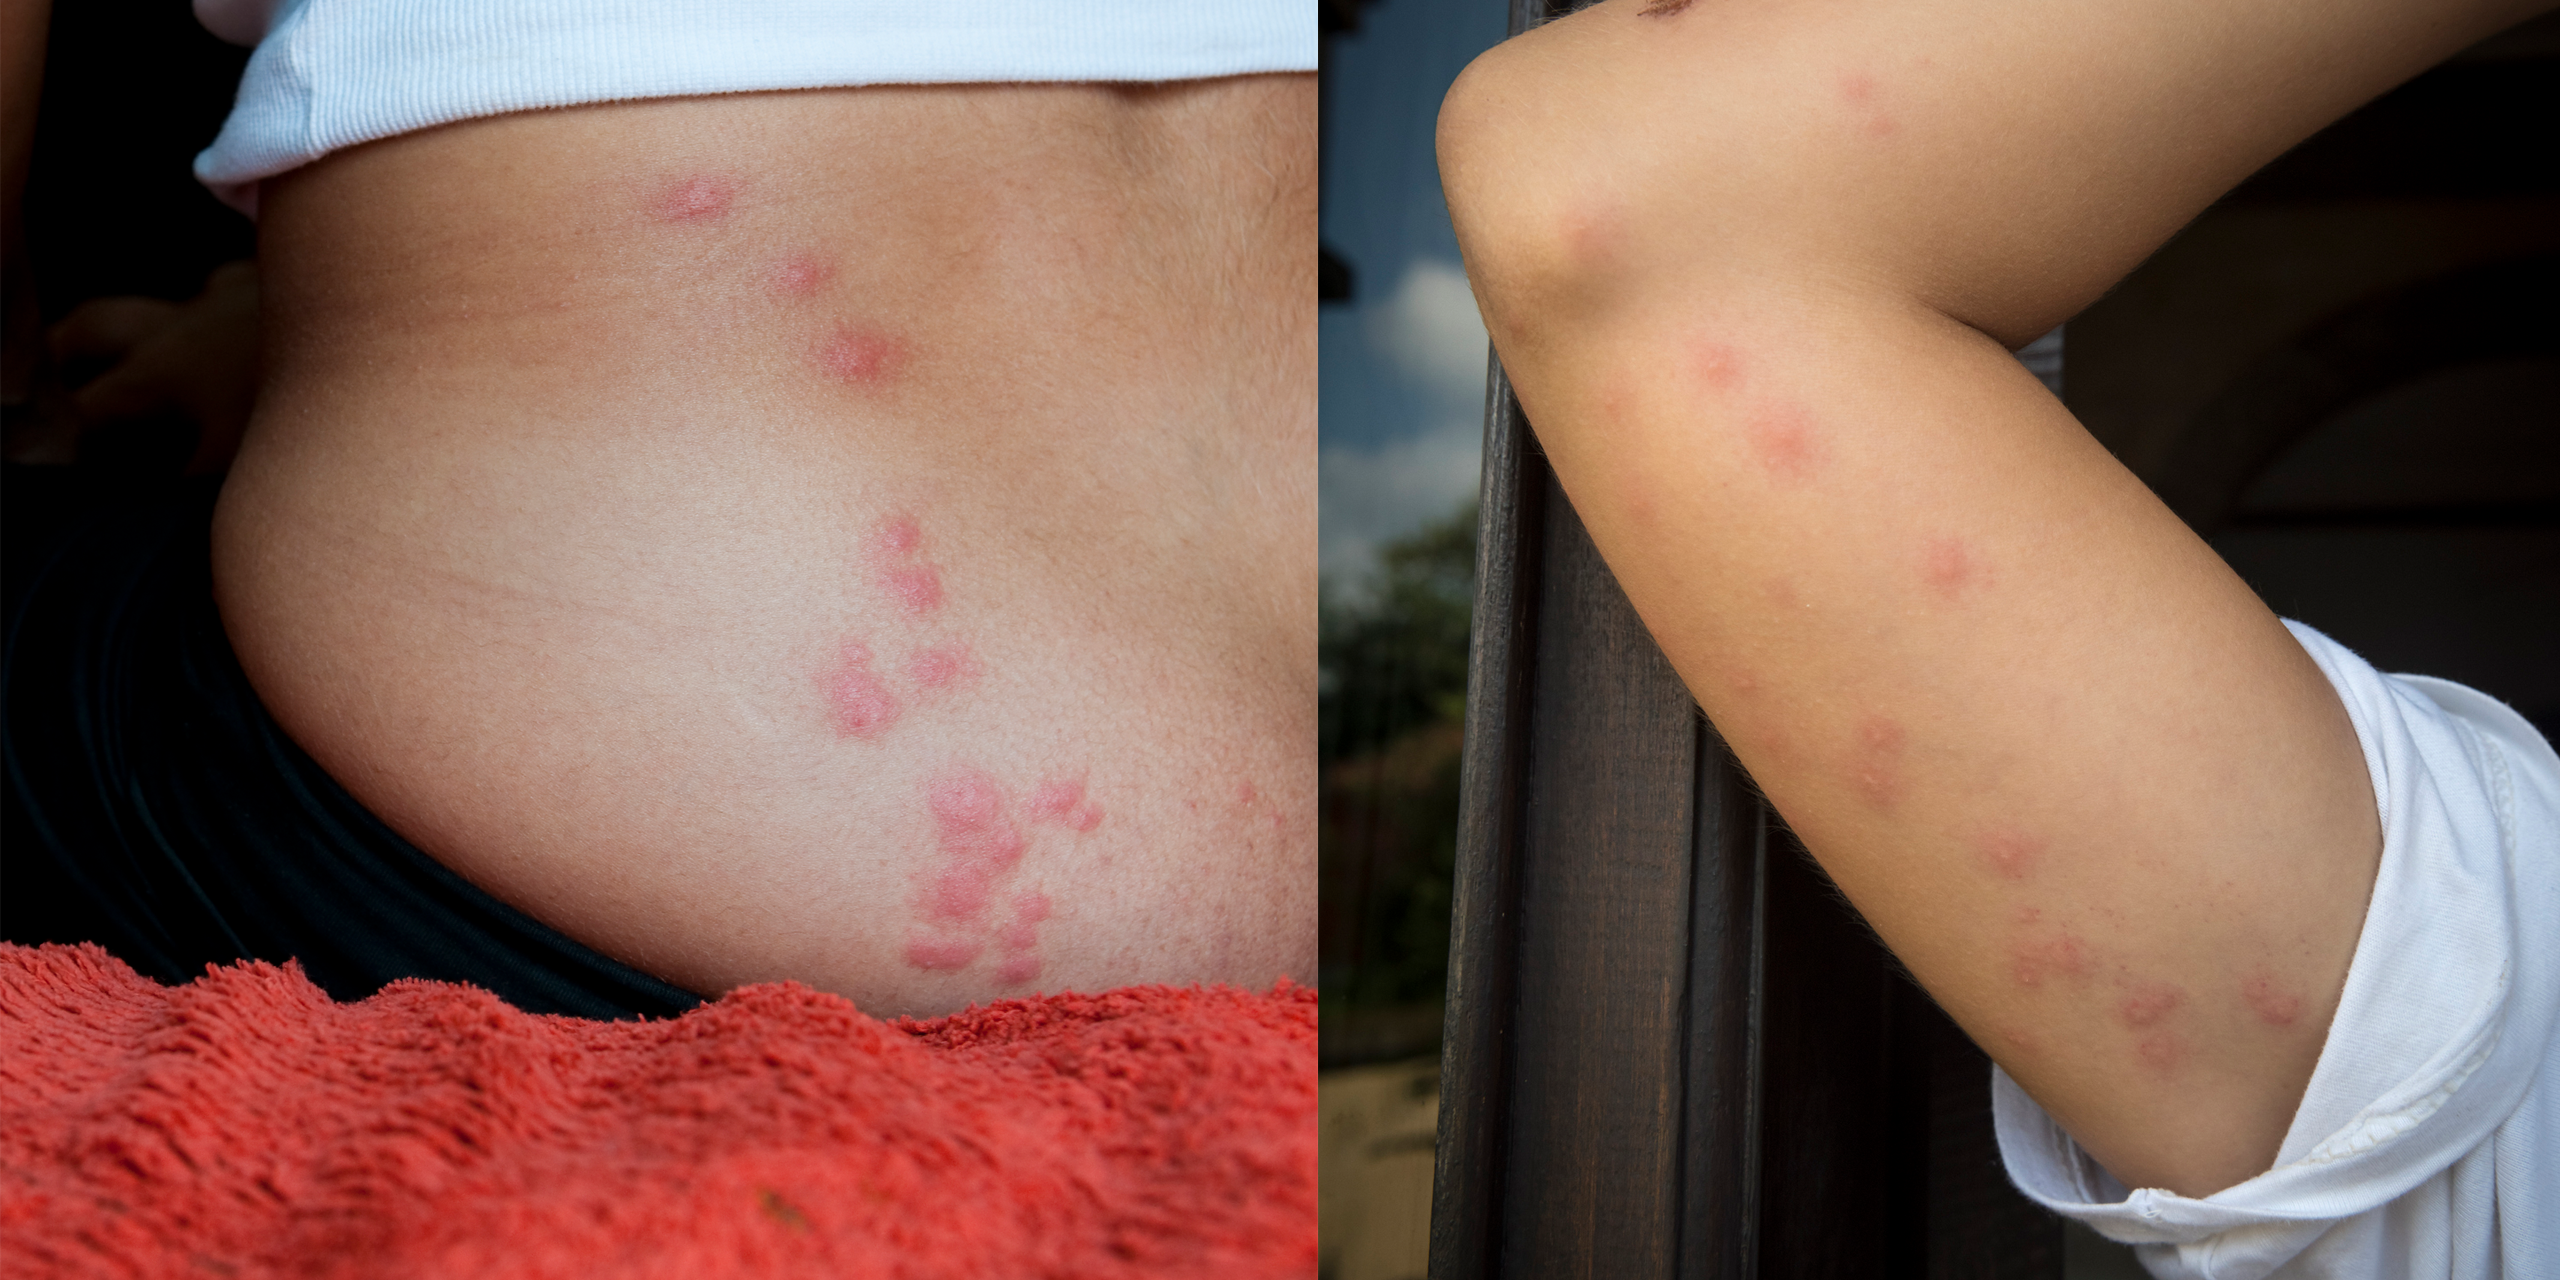 Bed Bug Bites Pictures Symptoms What Do Bed Bug Bites Look Like